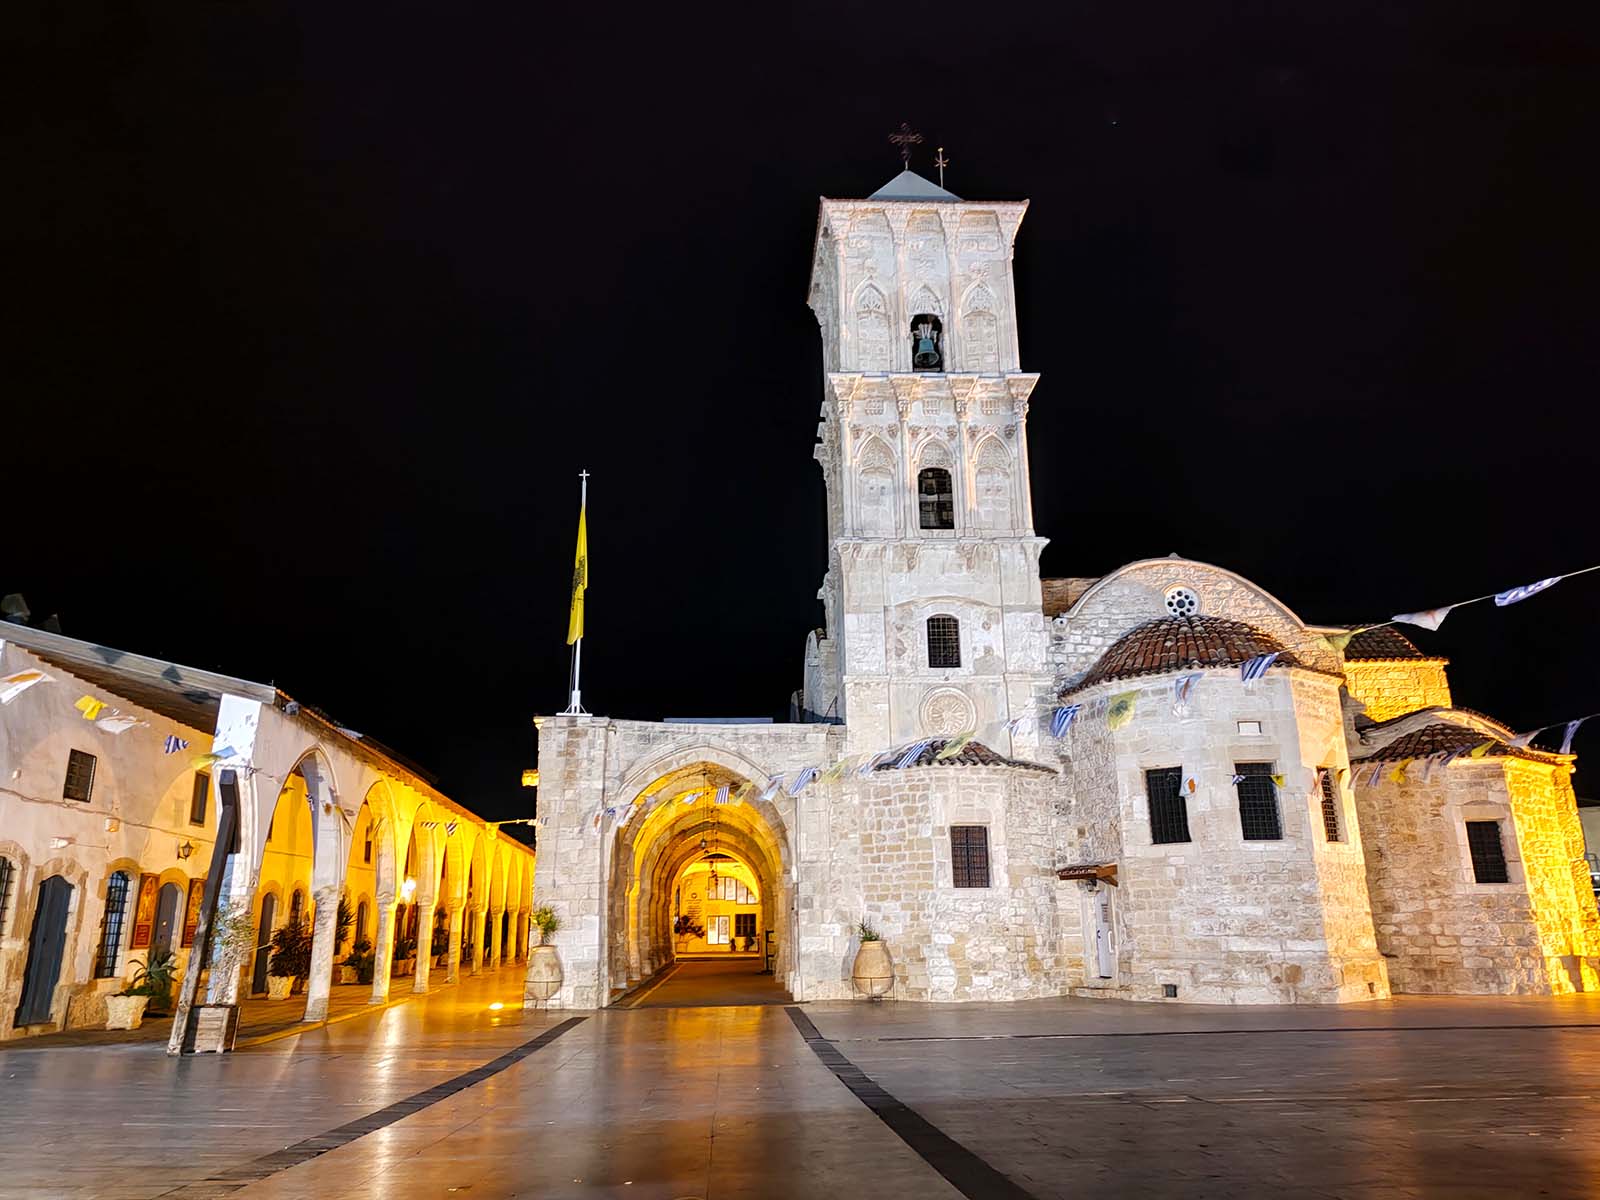 The famous Saint Lazarus church in Larnaca at night.